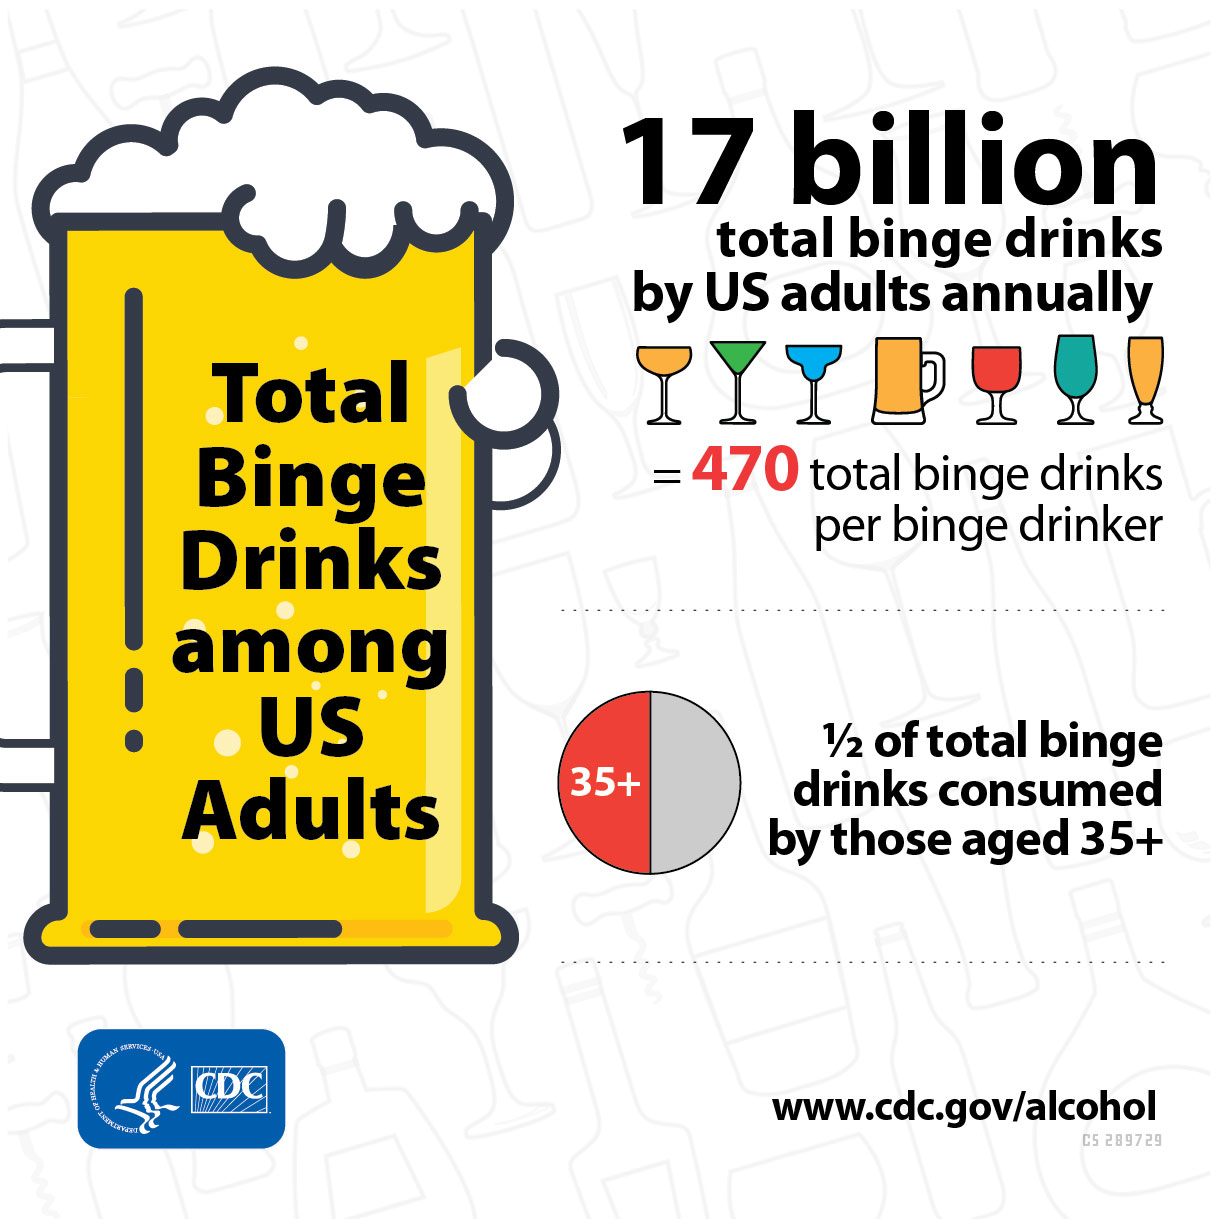 During Binges Us Adults Have 17 Billion Drinks A Year Cdc Online Newsroom Cdc 5348